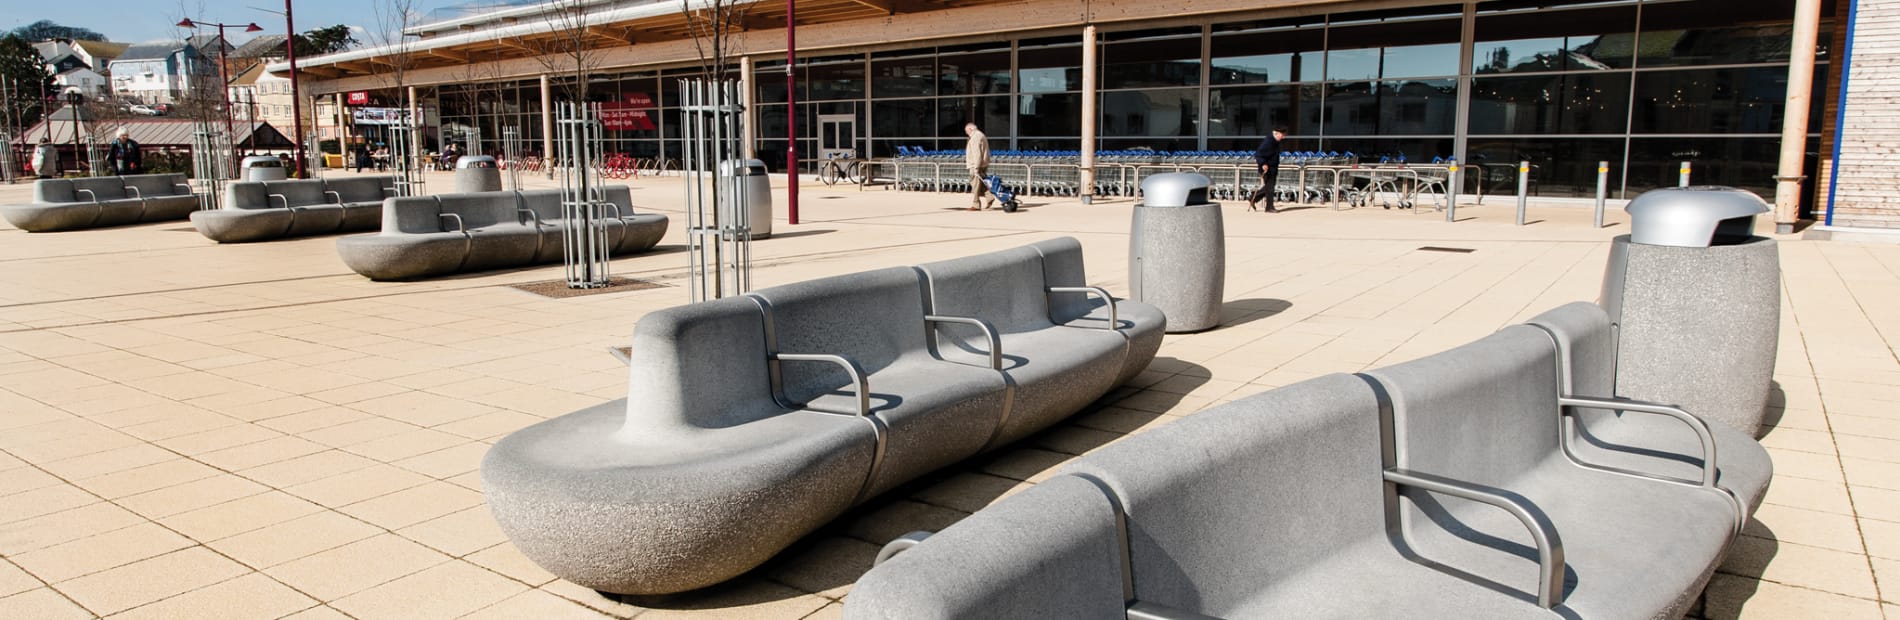 Igneo Seating outside railway station